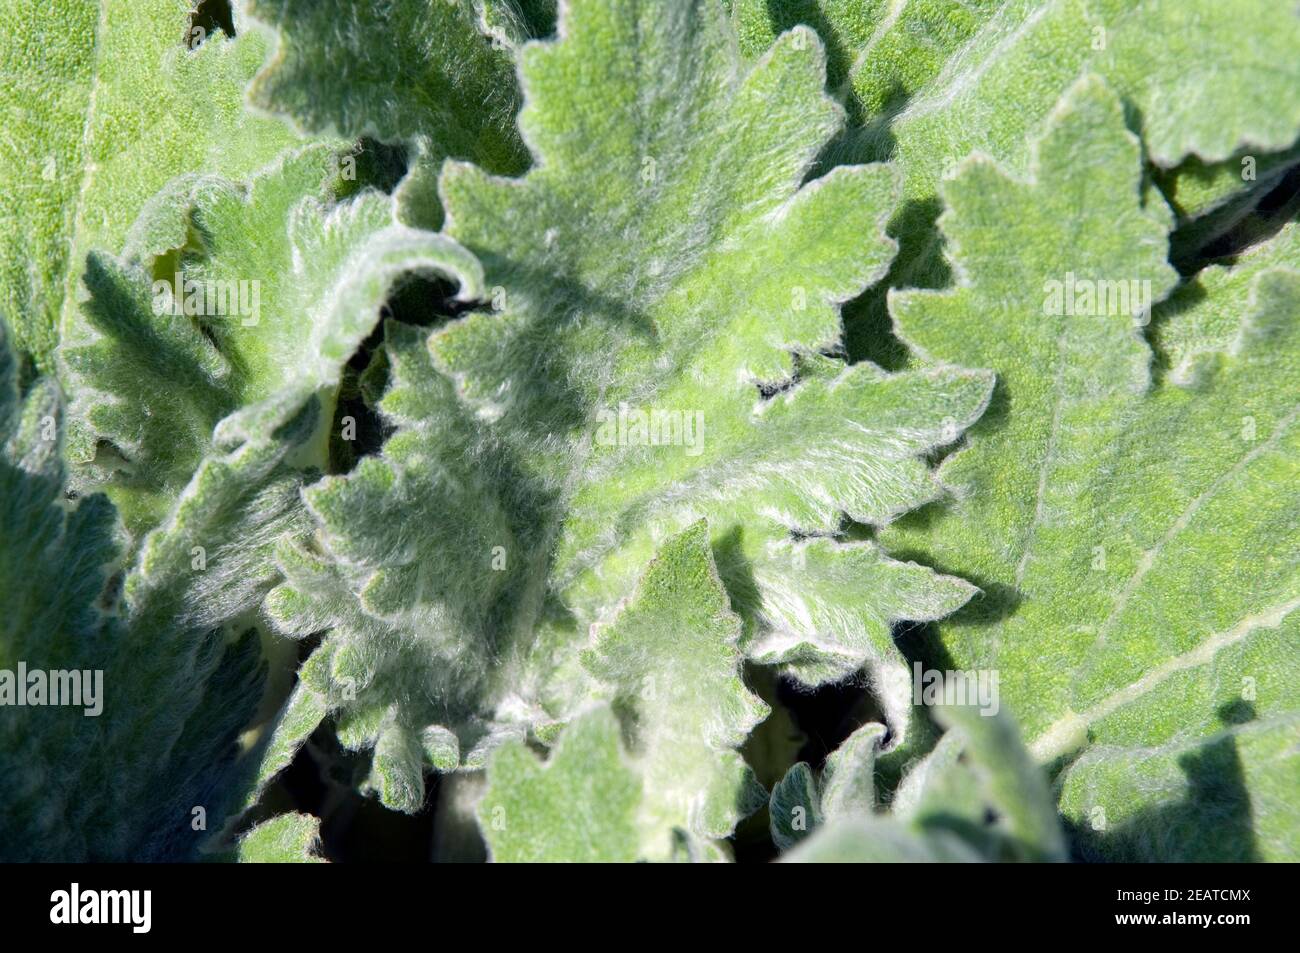 Wolliger Salbei, Salvia aethiops Stock Photo